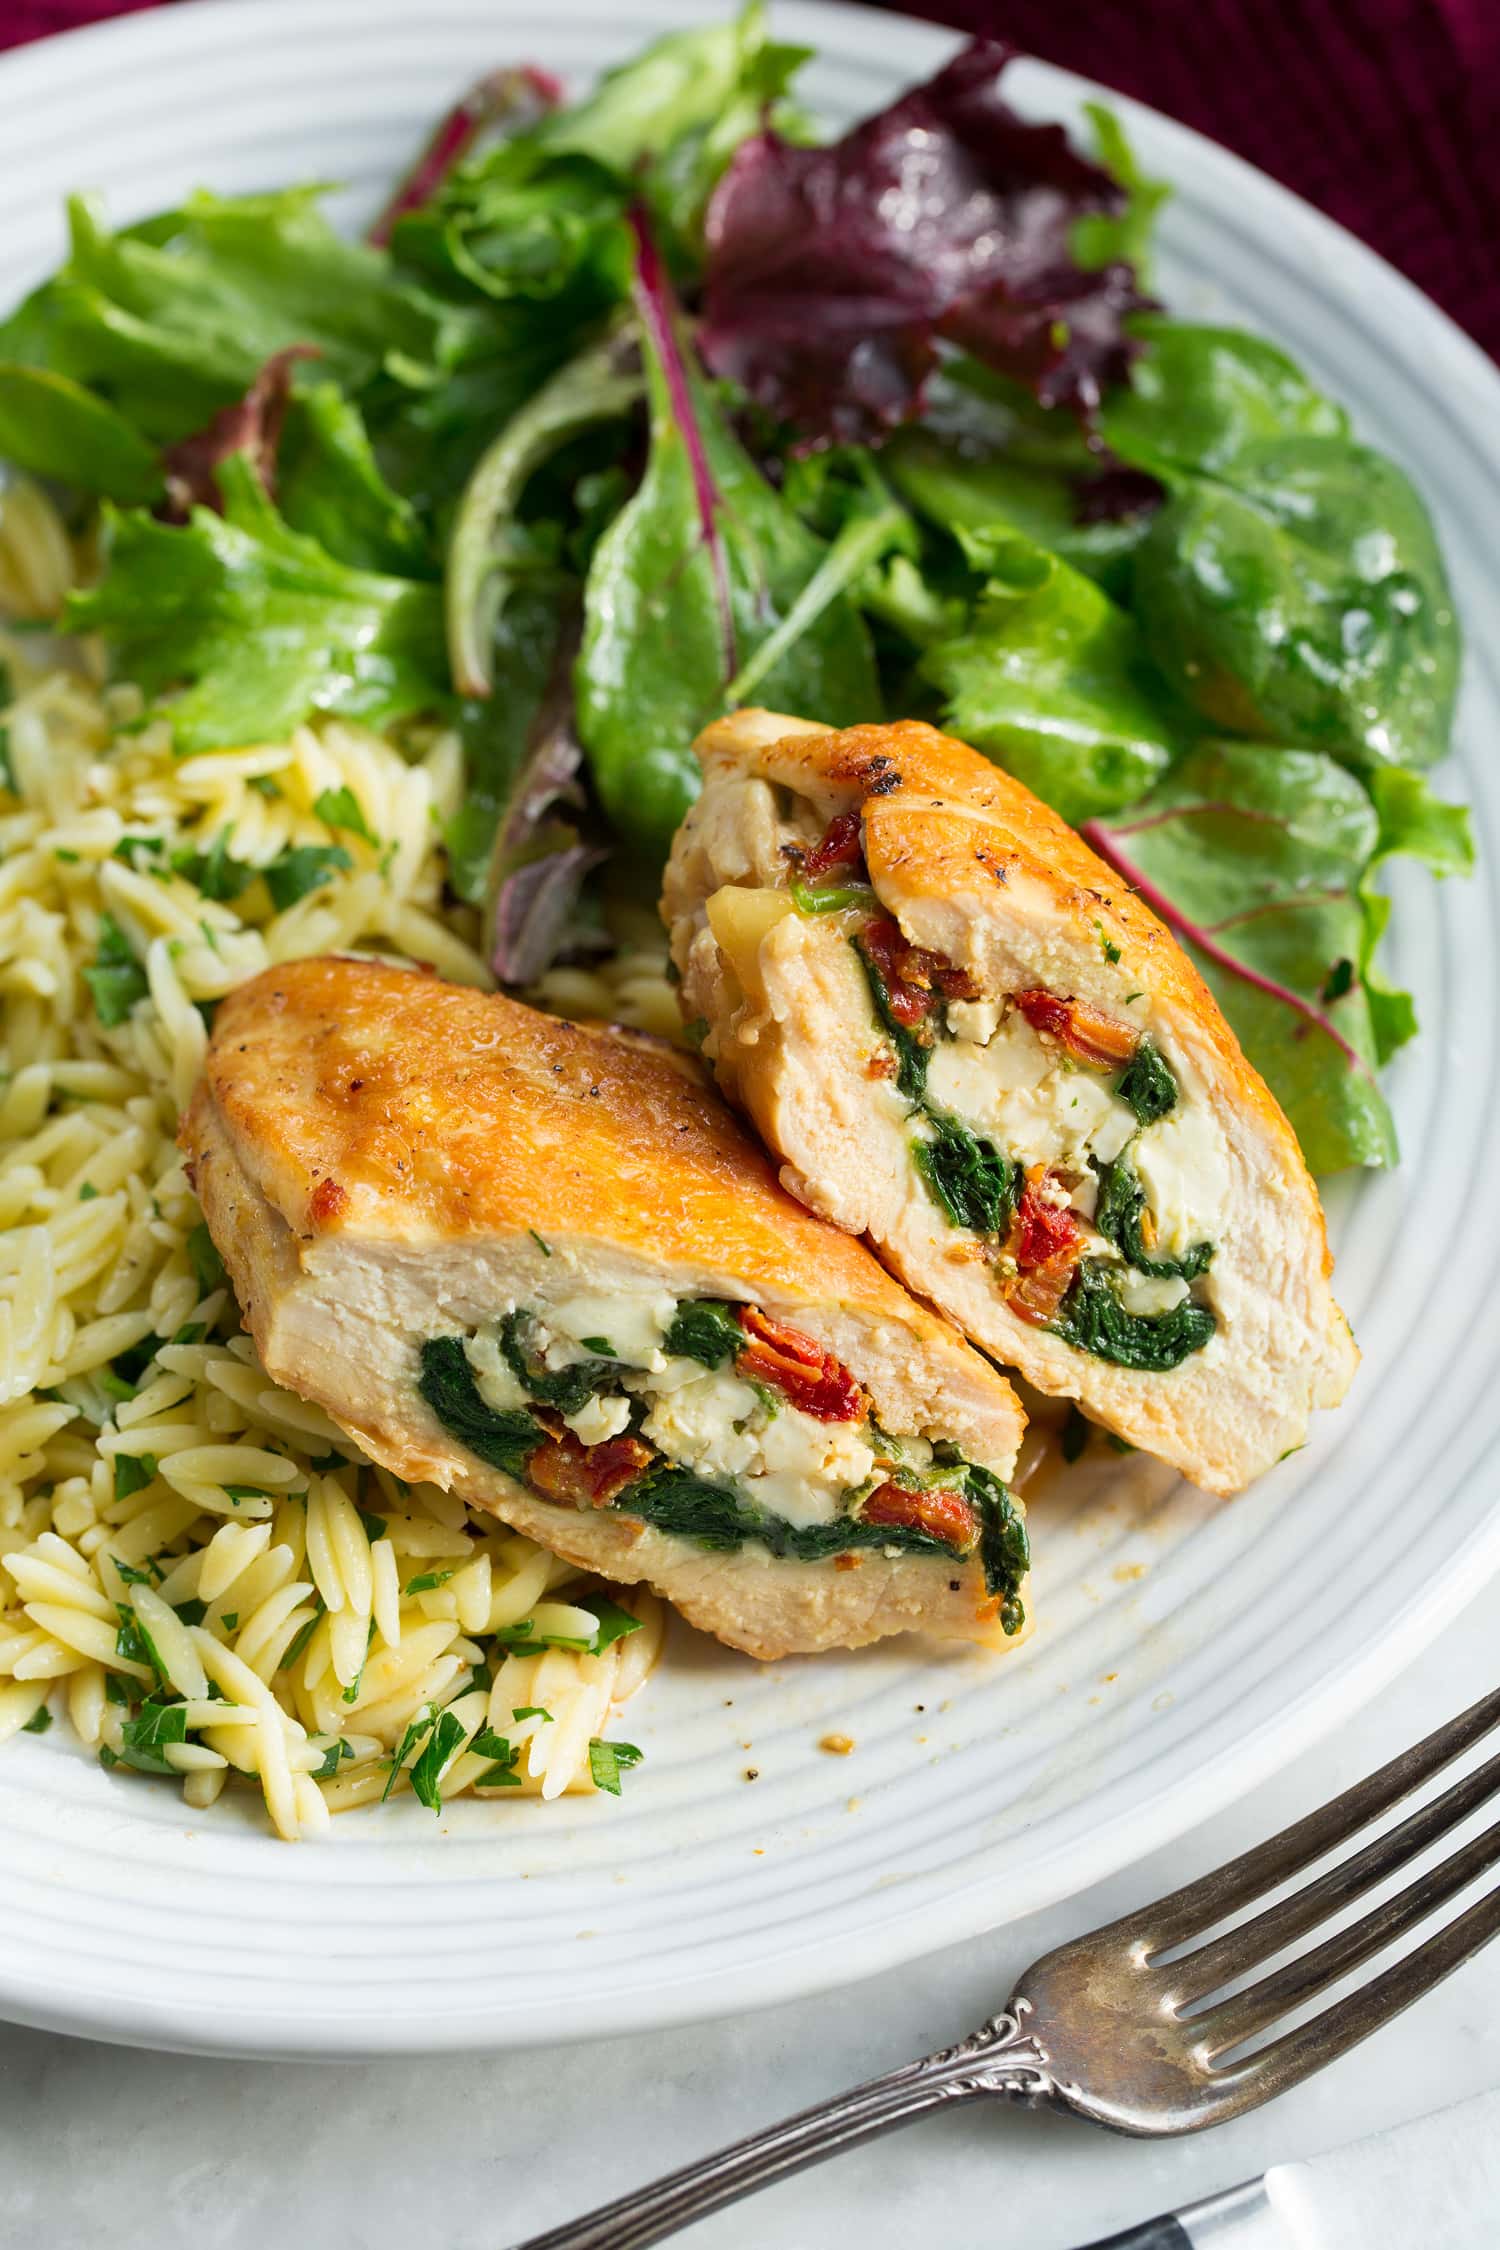 Two sliced stuffed chicken breasts halves shown with serving suggestions of side salad and lemon orzo.